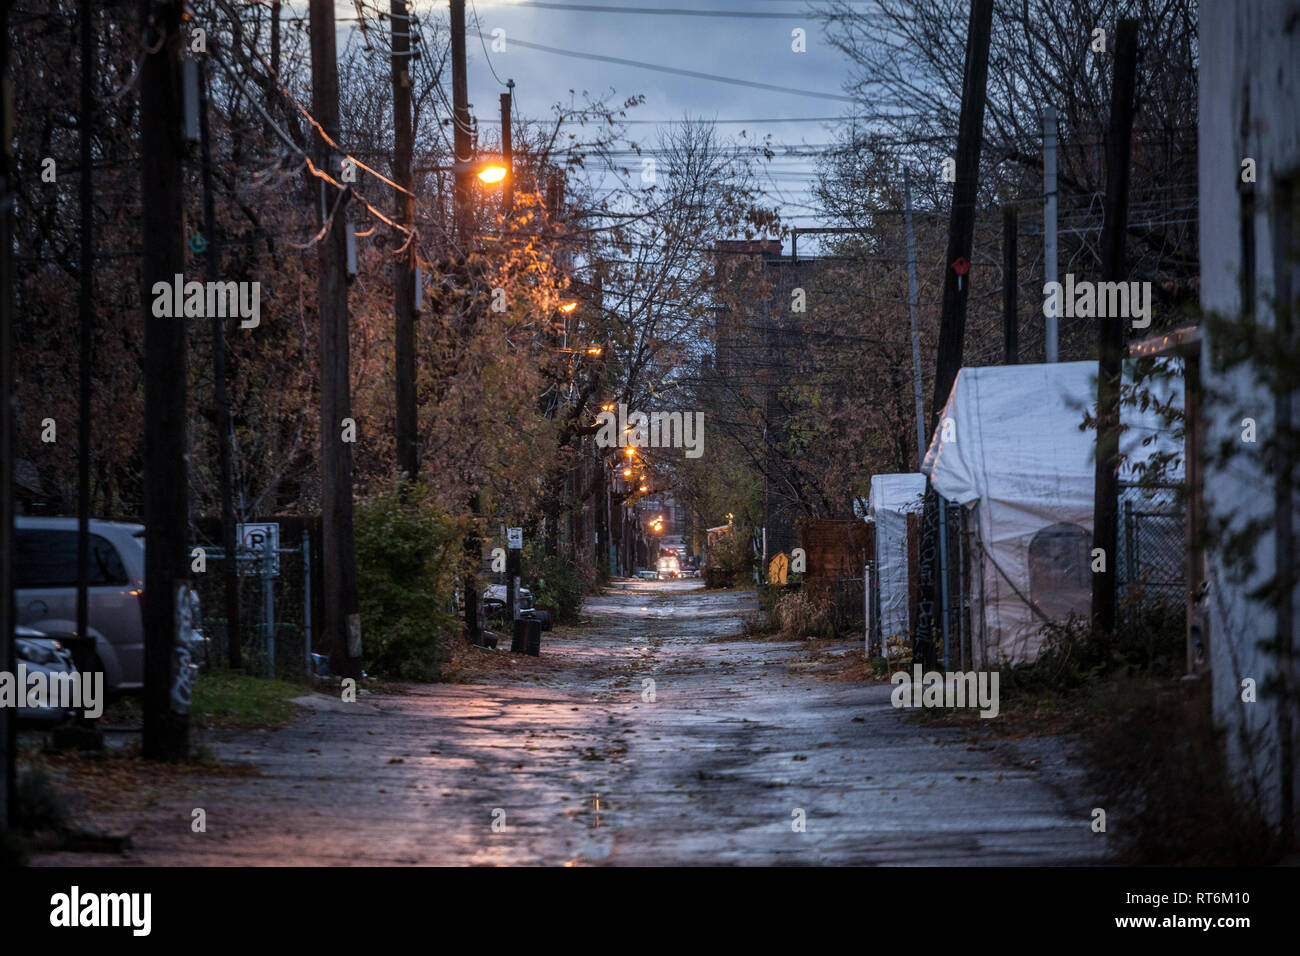 MONTREAL, CANADA - NOVEMBER 3, 2018: Dilapidated typical north American residential street in autumn in Montreal, Quebec, during a rainy evening with  Stock Photo